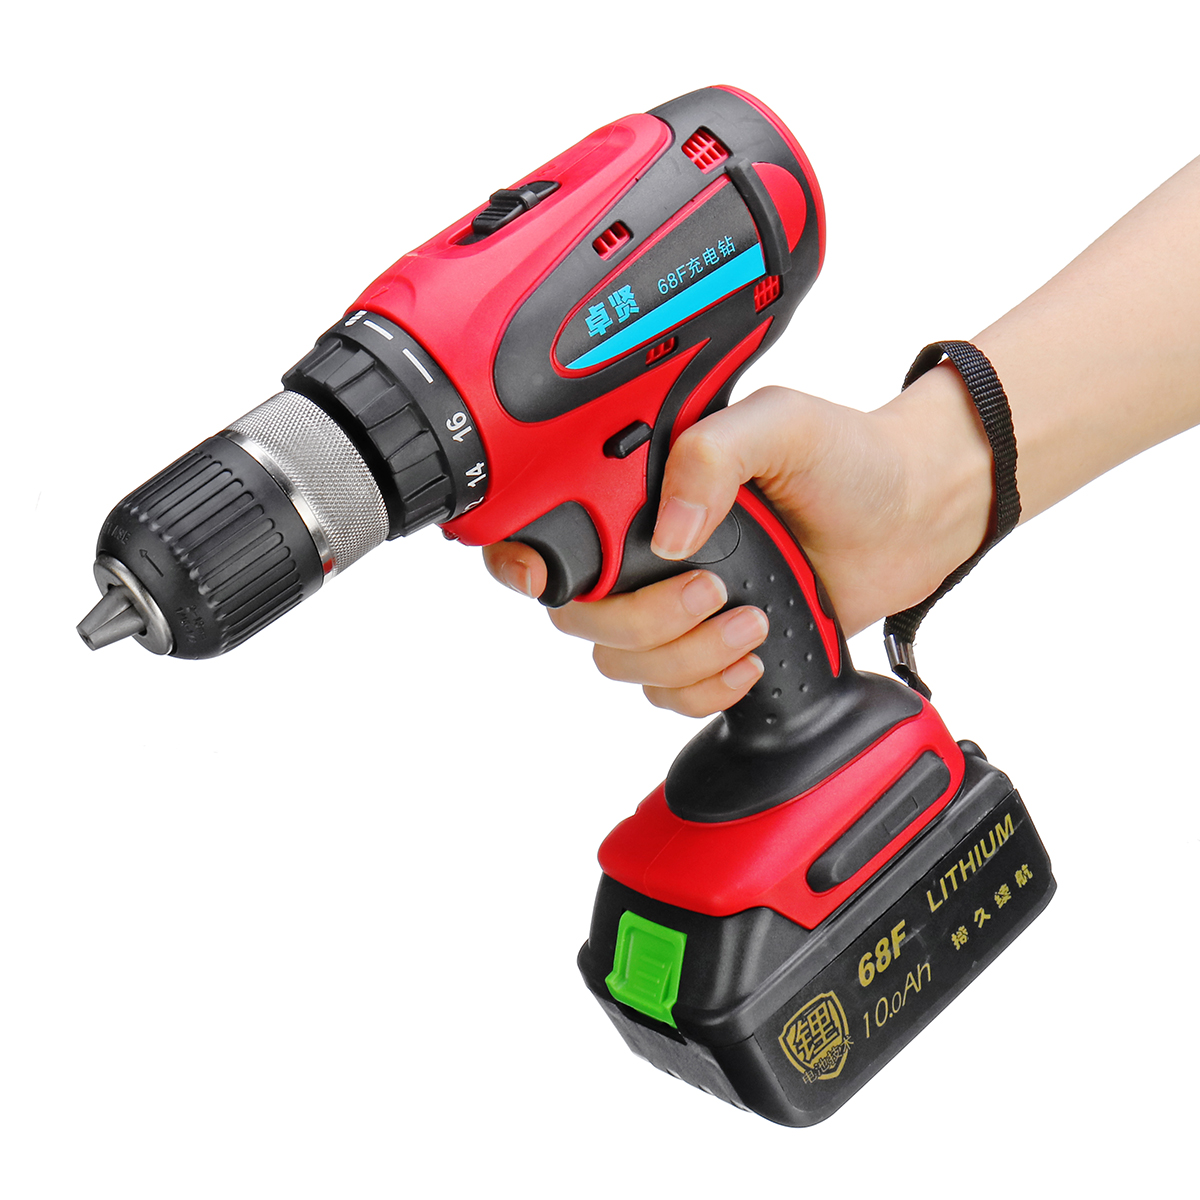 68V-10Ah-Cordless-Rechargeable-Electric-Drill-2-Speed-Heavy-Duty-Torque-Power-Drills-1403940-9